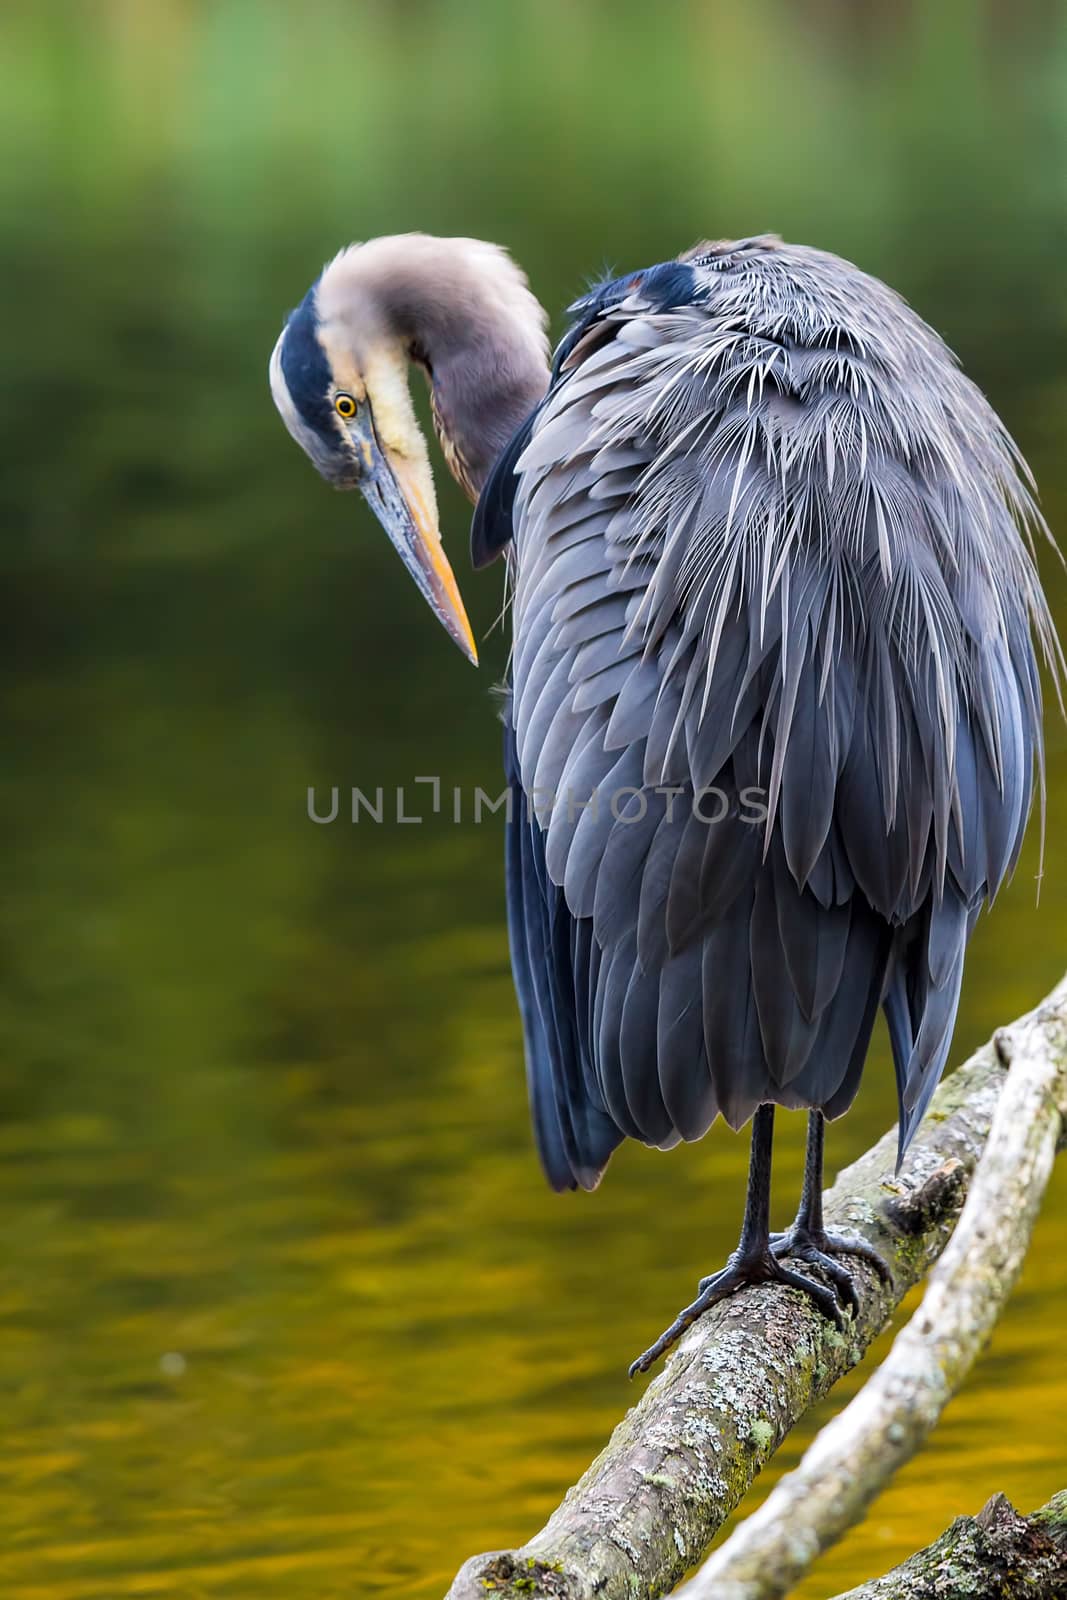 The Great Blue Heron perched on a tree branch preening by Davidgn